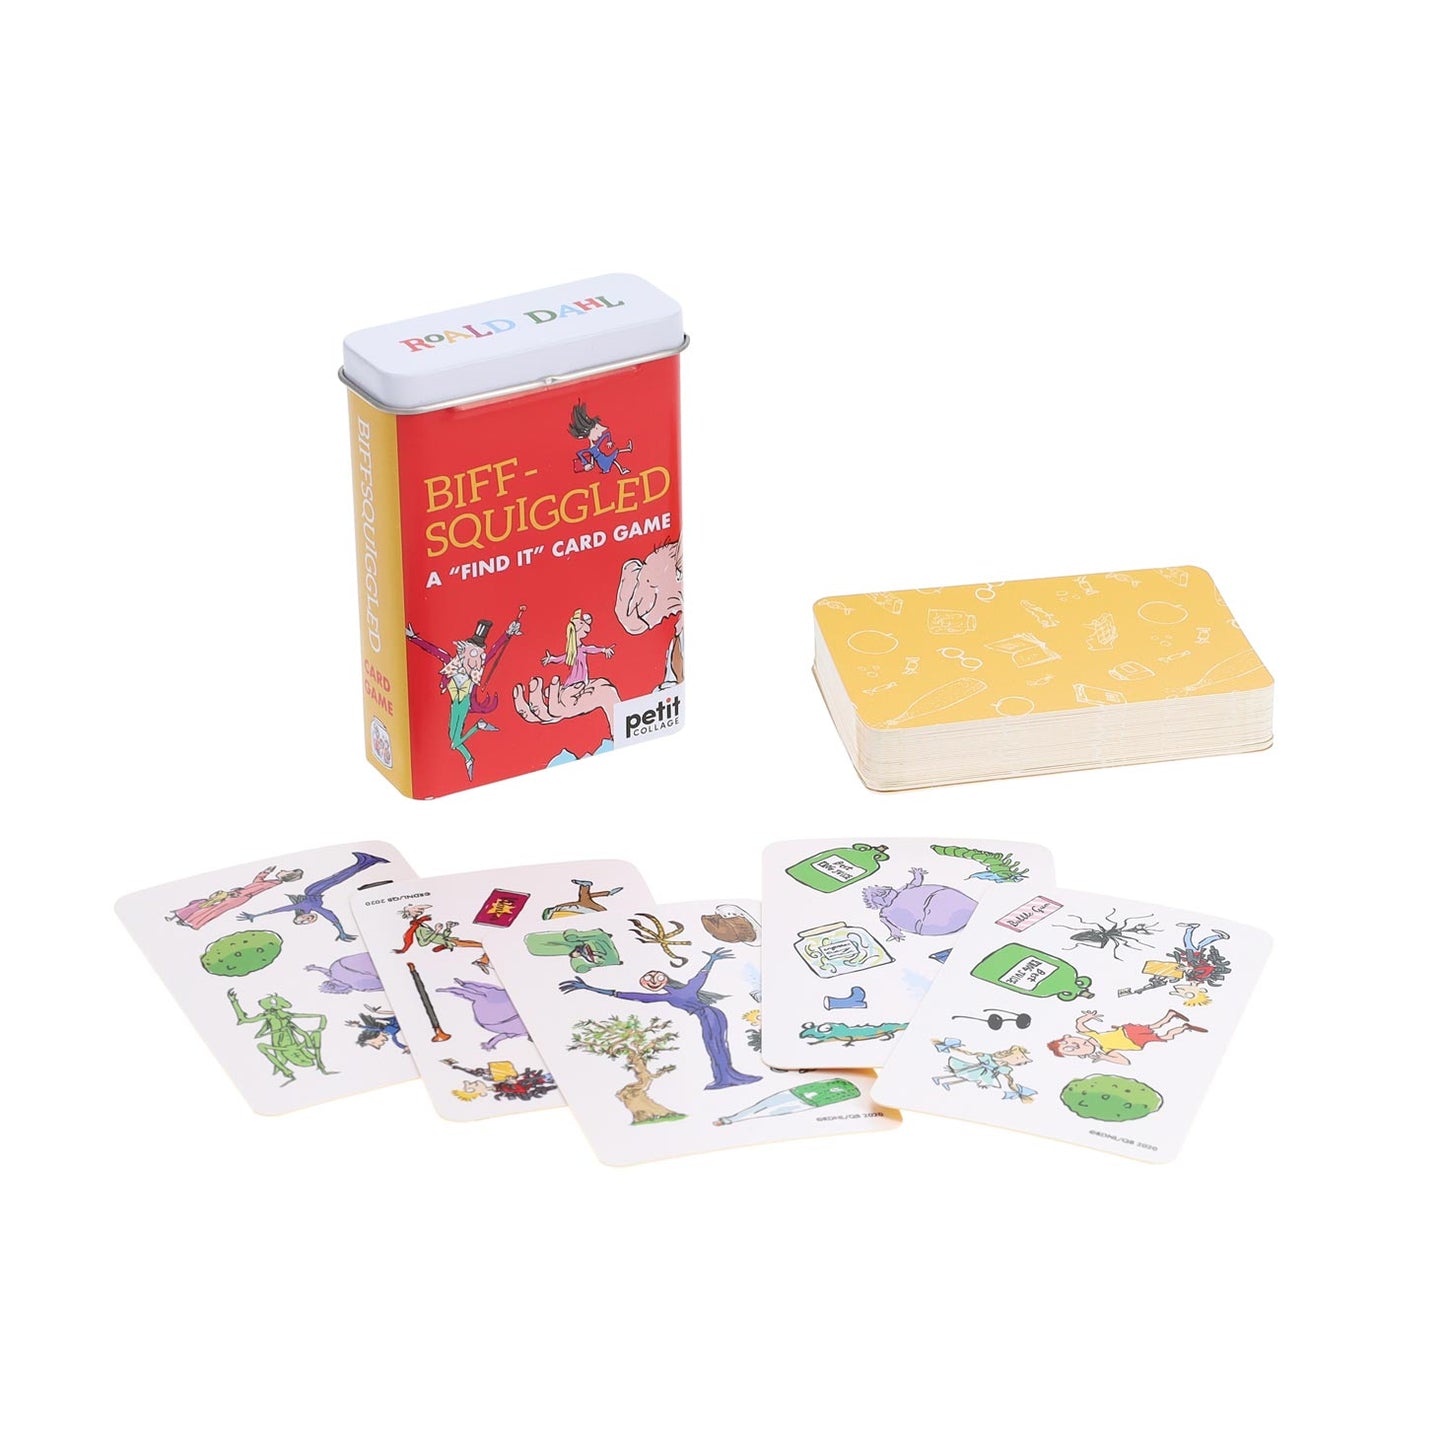 Biff-Squiggled Card Game from Roald Dahl and Quentin Blake